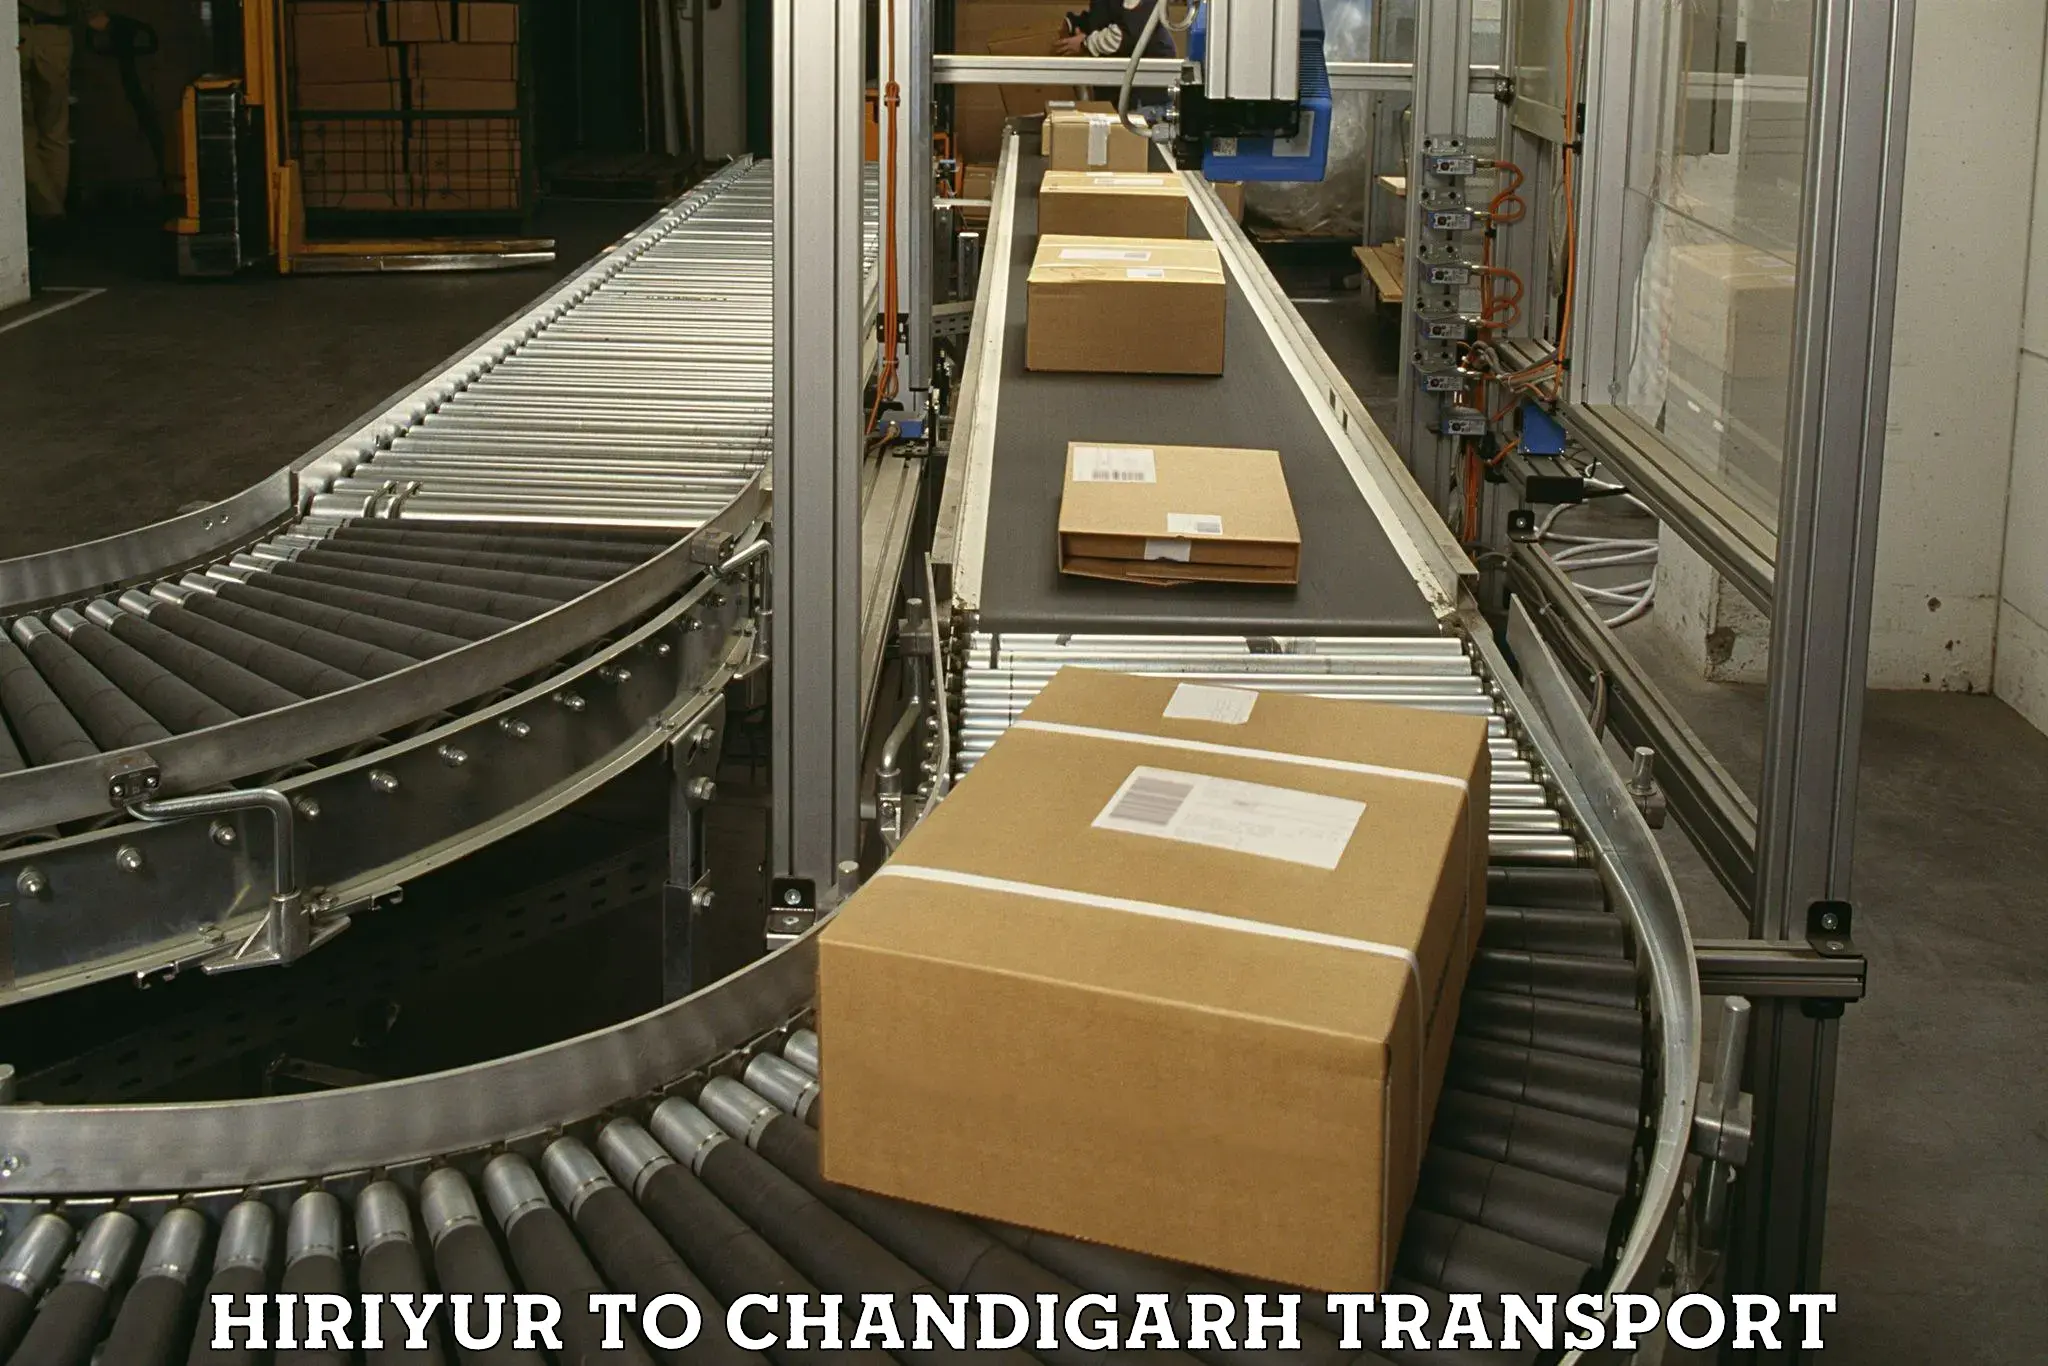 Goods delivery service Hiriyur to Chandigarh